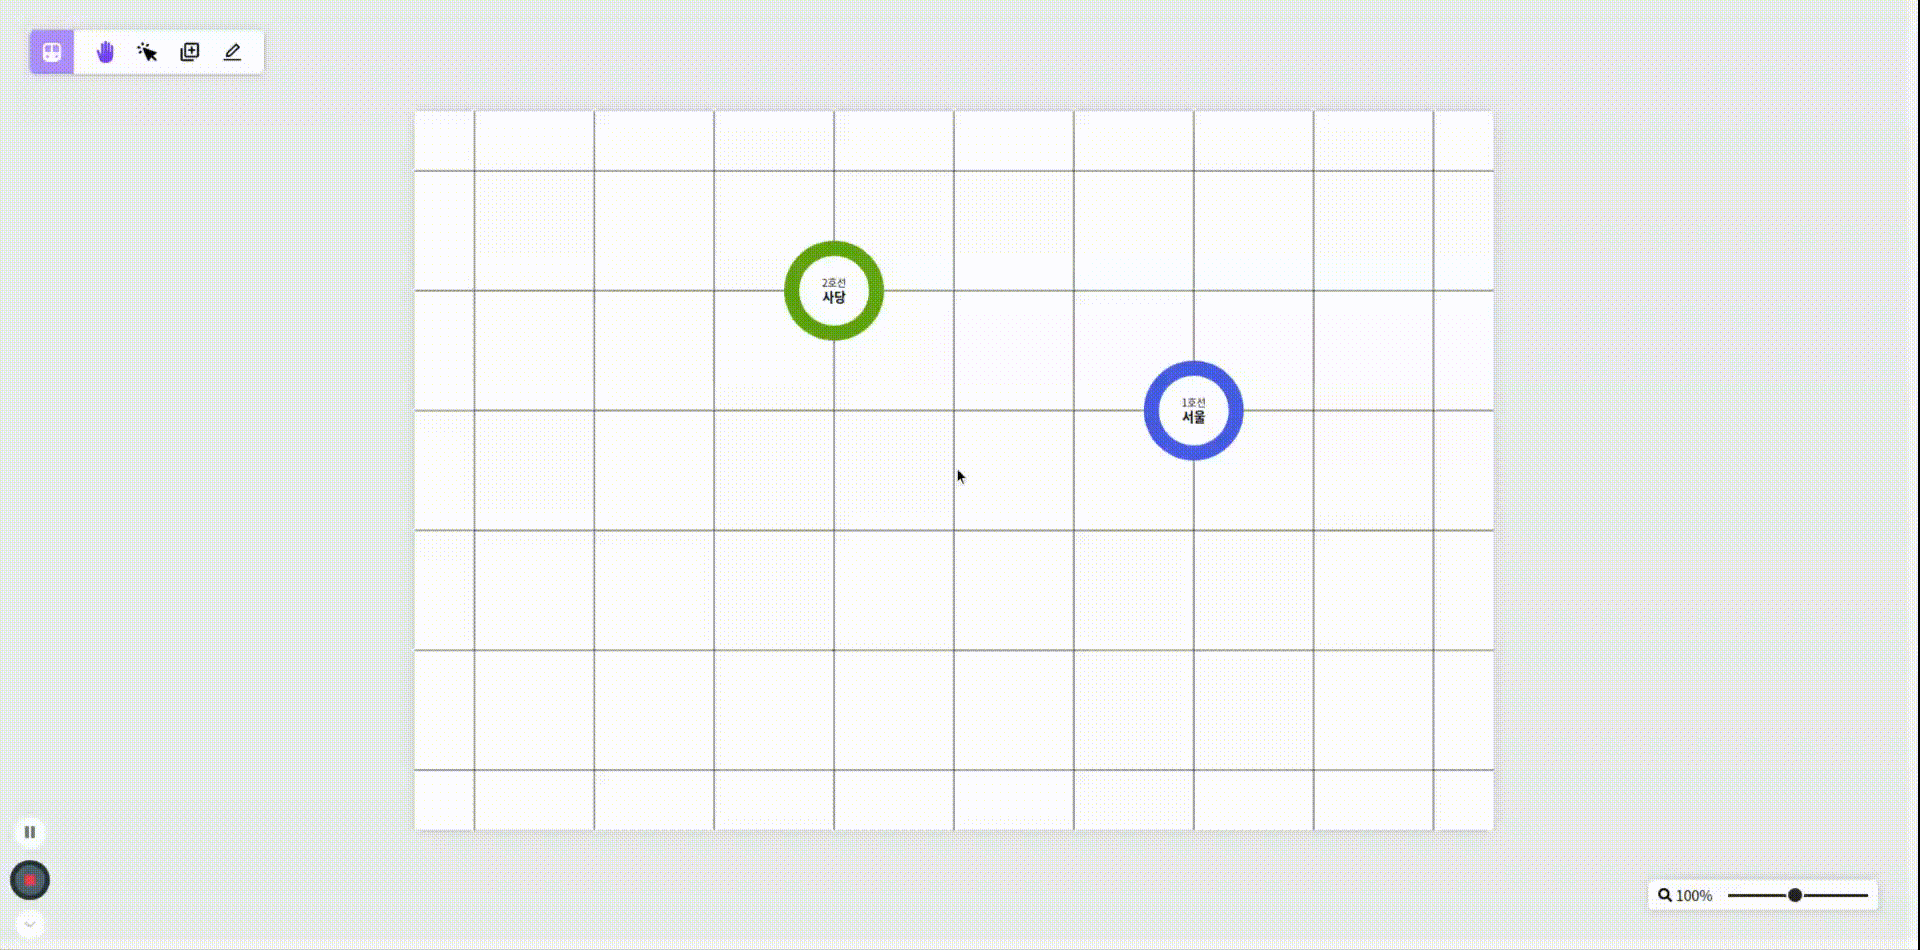 train-map-visualizer-side-project-midterm-review-6.gif